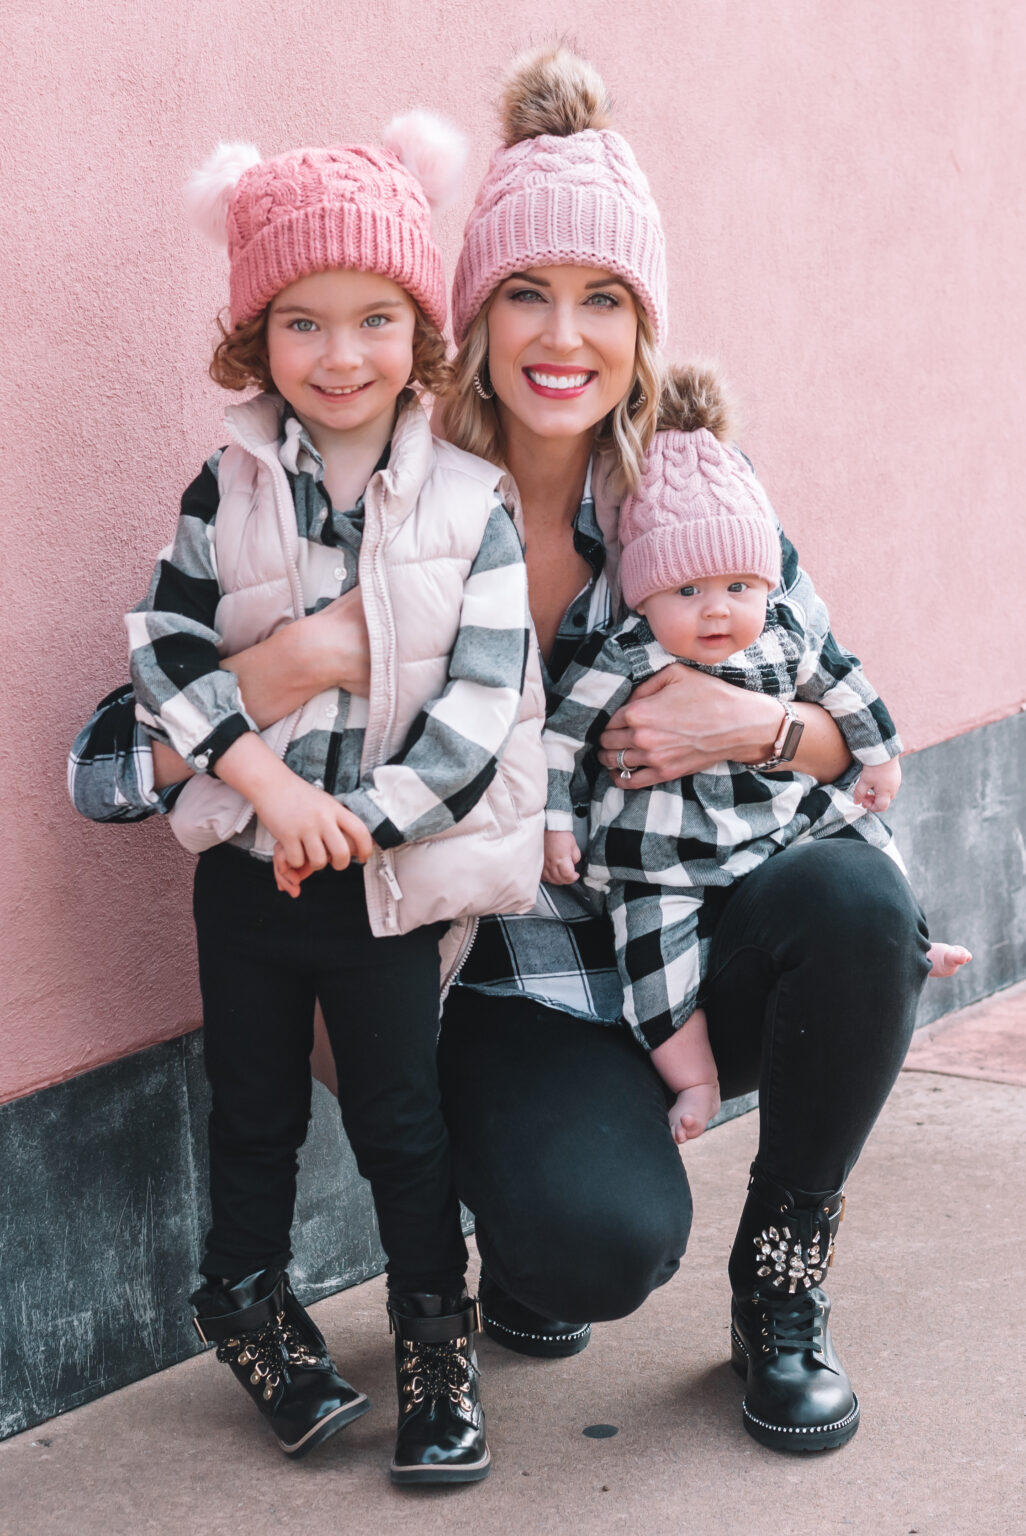 Matching in Buffalo Plaid - Straight A Style